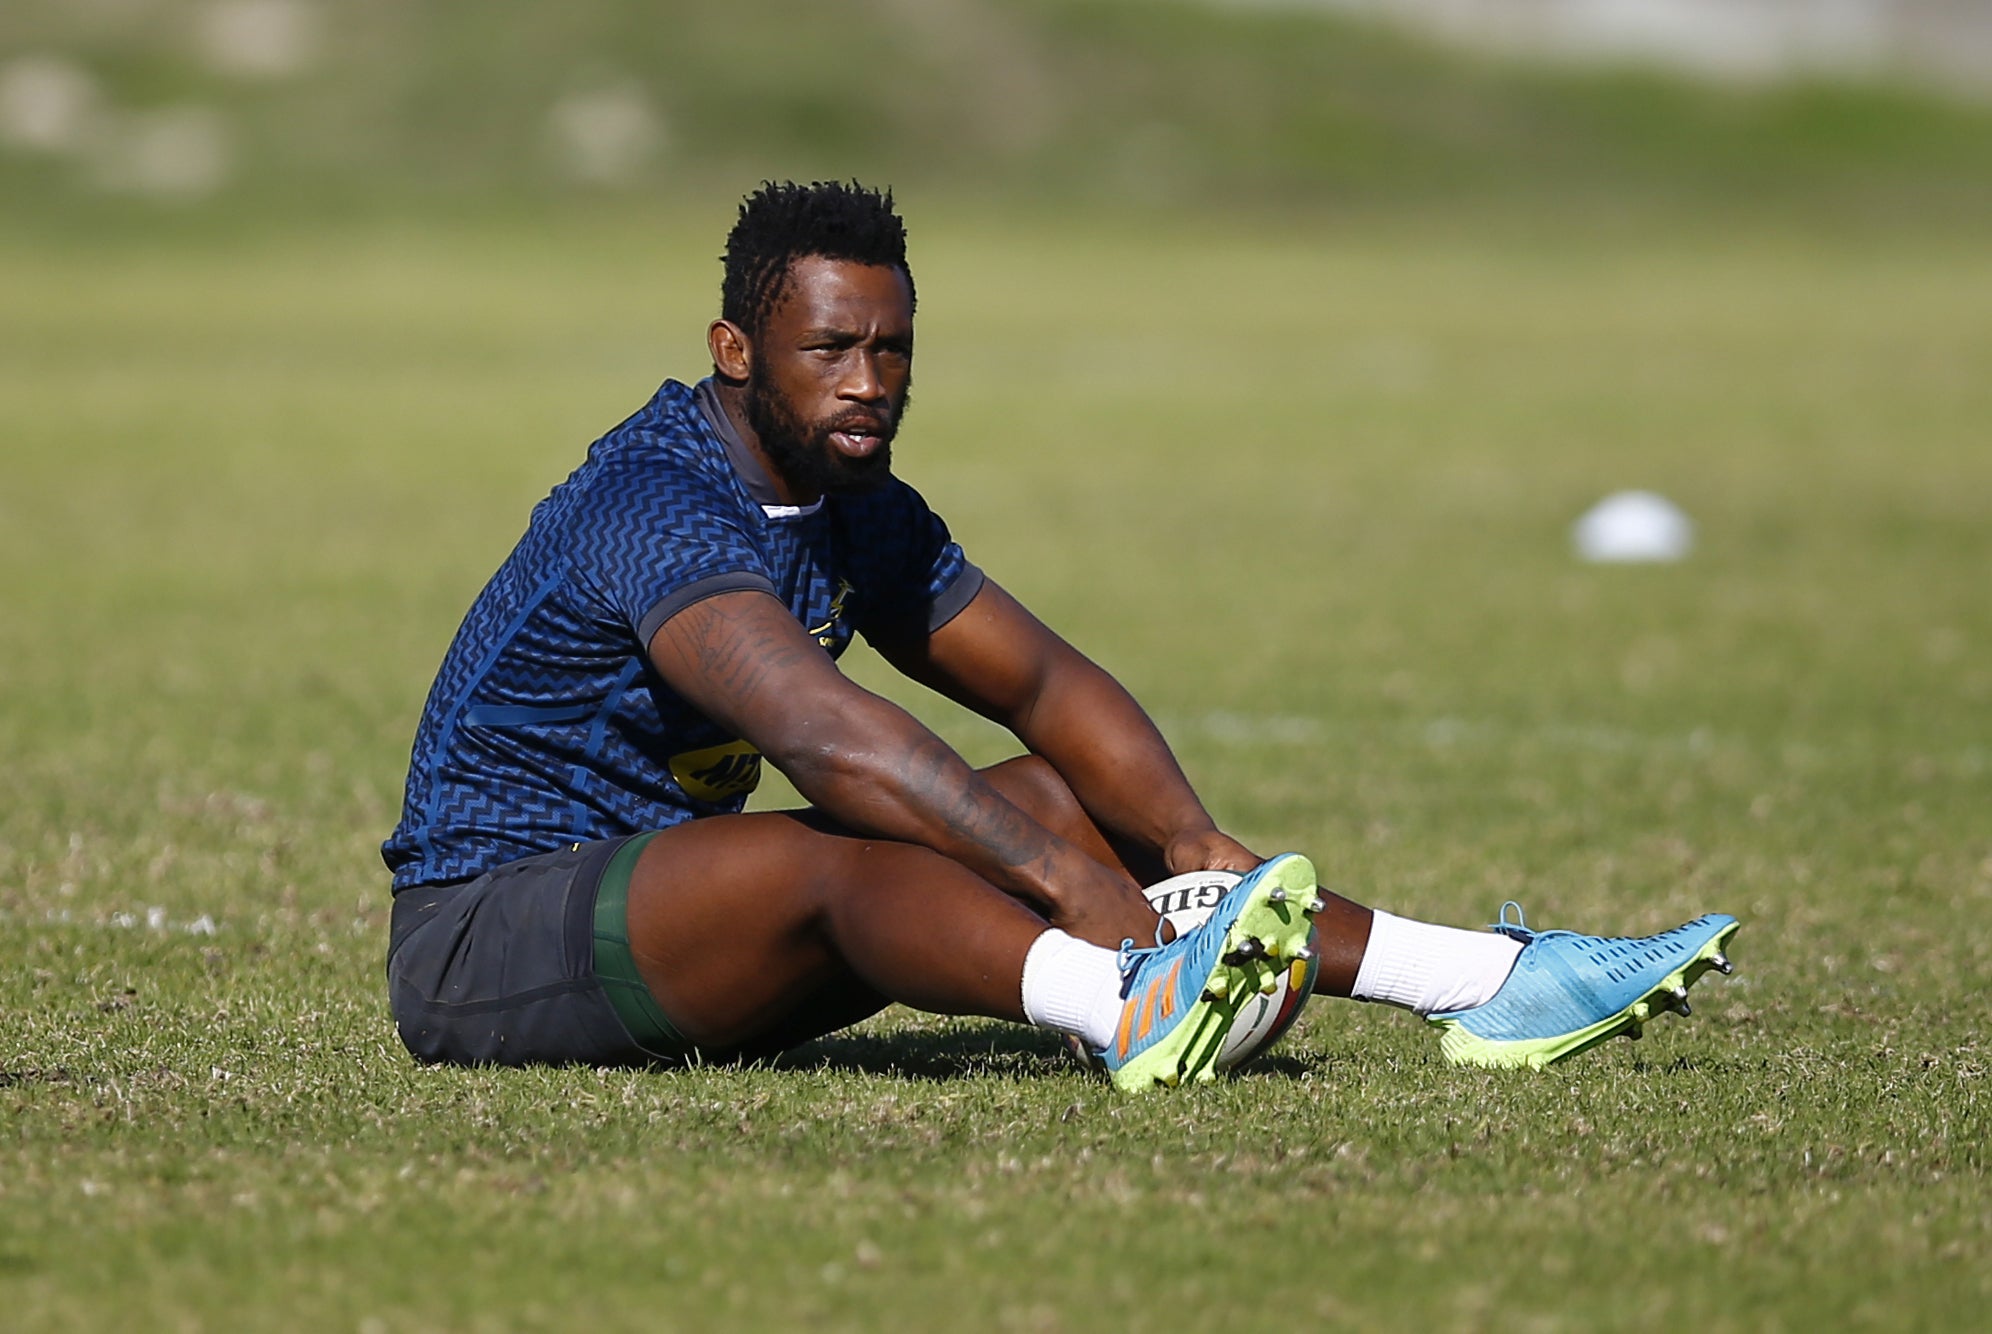 Rassie Erasmus has been unhappy with referee treatment of Siya Kolisi, pictured, in the British and Irish Lions series (Steve Haag)